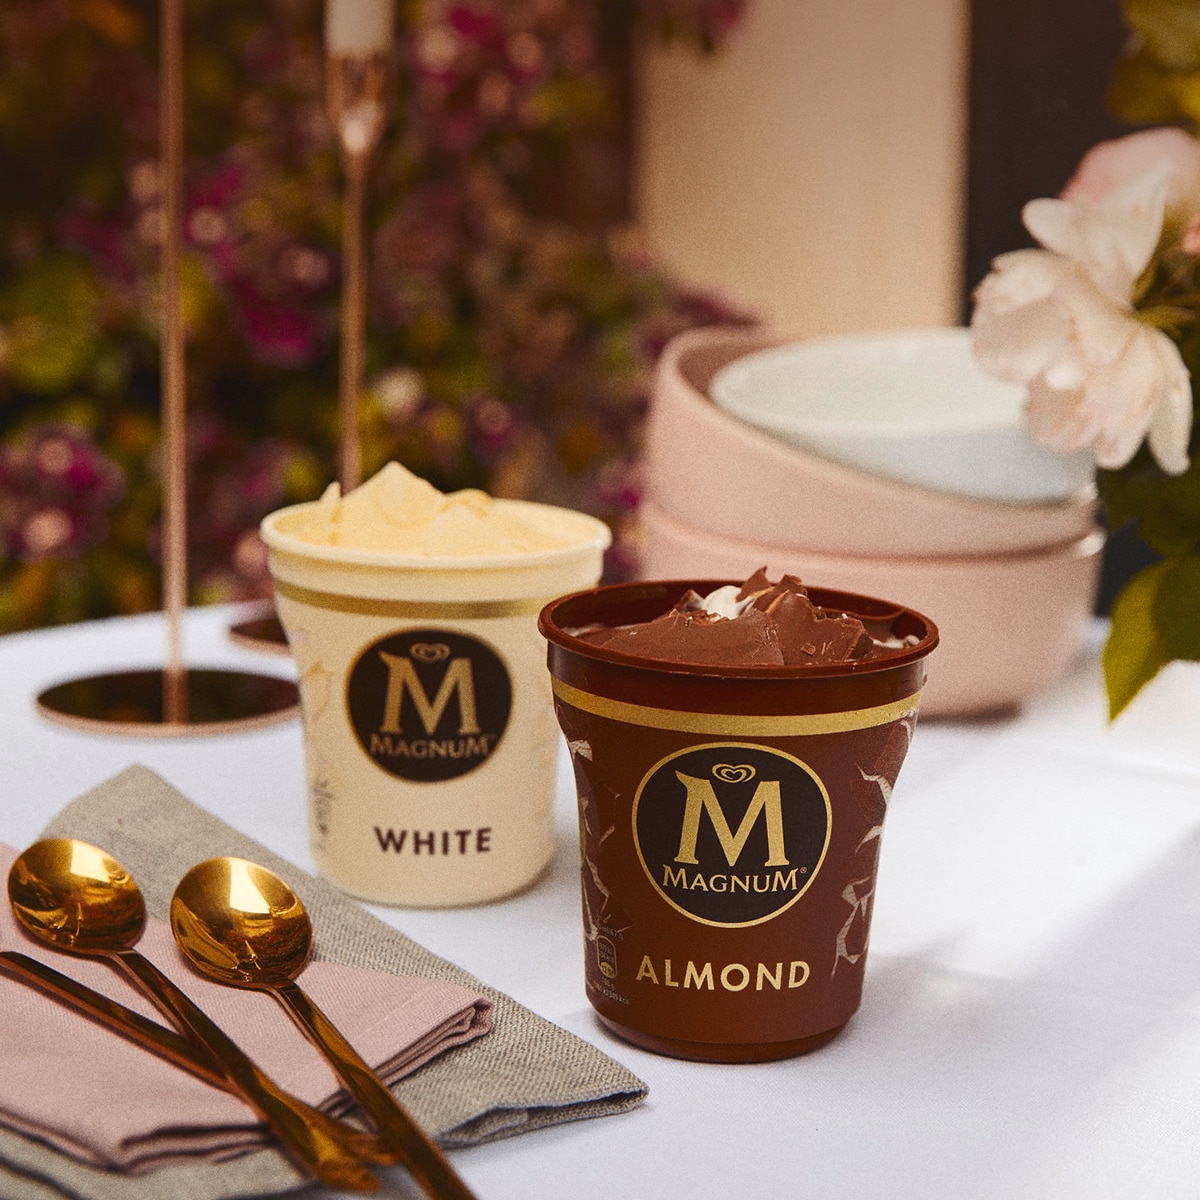 Magnum recyclable tubs